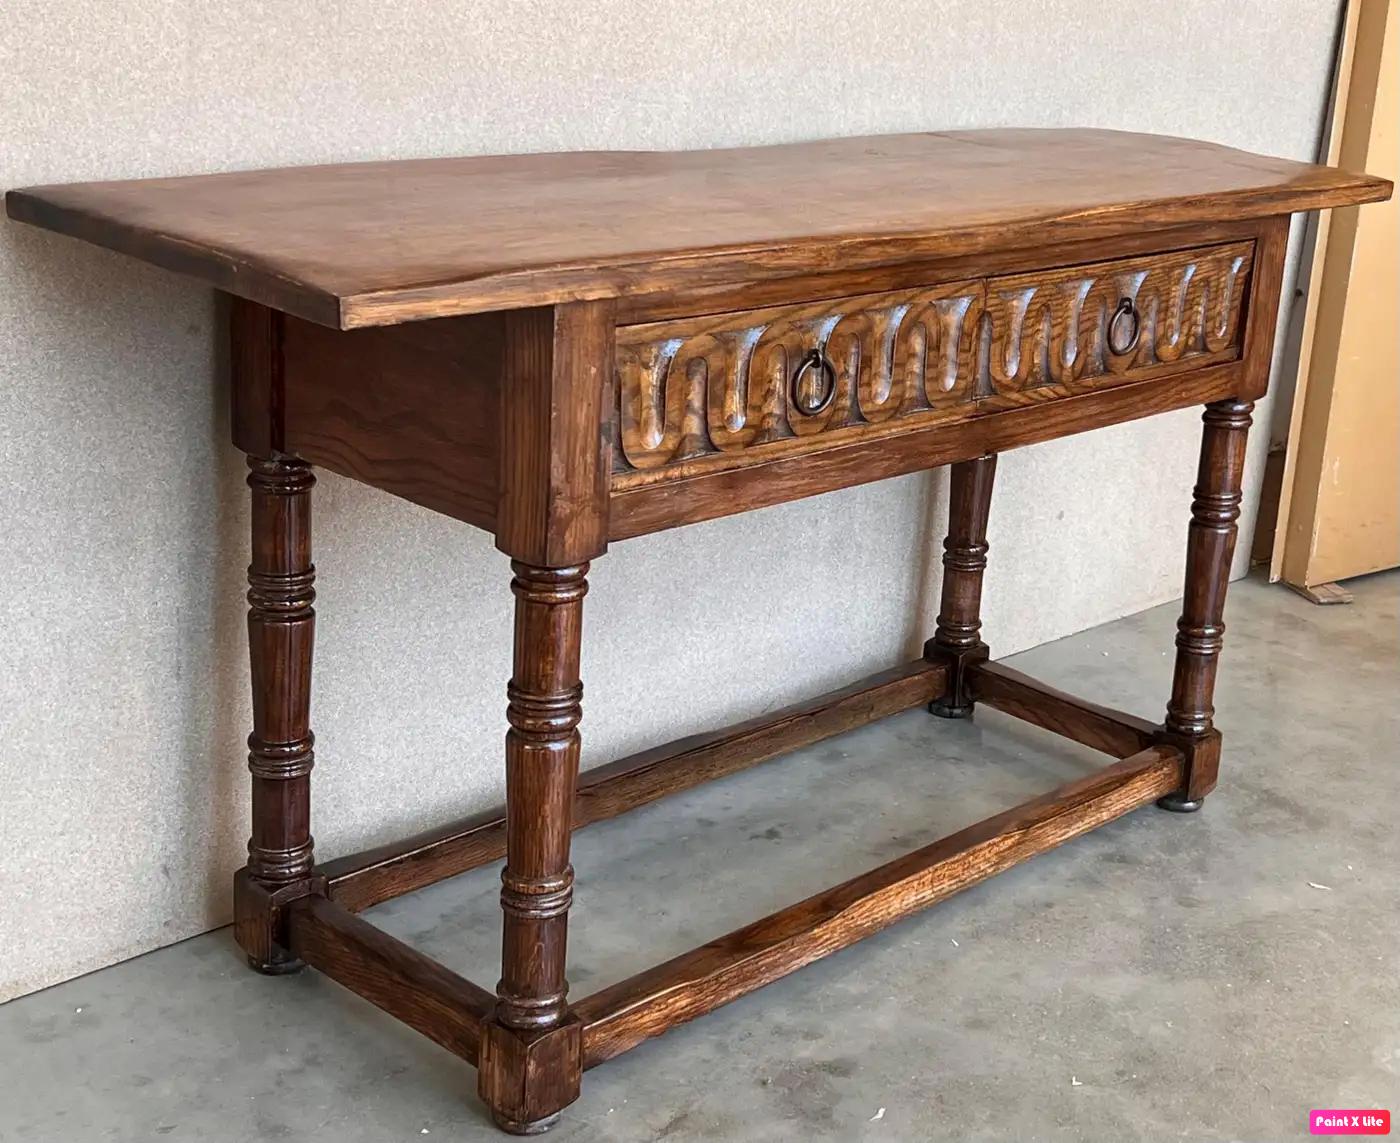 Early 20th century carved Spanish console with two drawers.
This table with character is of rare narrow depth. It is characteristic of Spanish Baroque furniture with a thick one-piece top, a simple and bold chip-carved ornate drawers, and bold